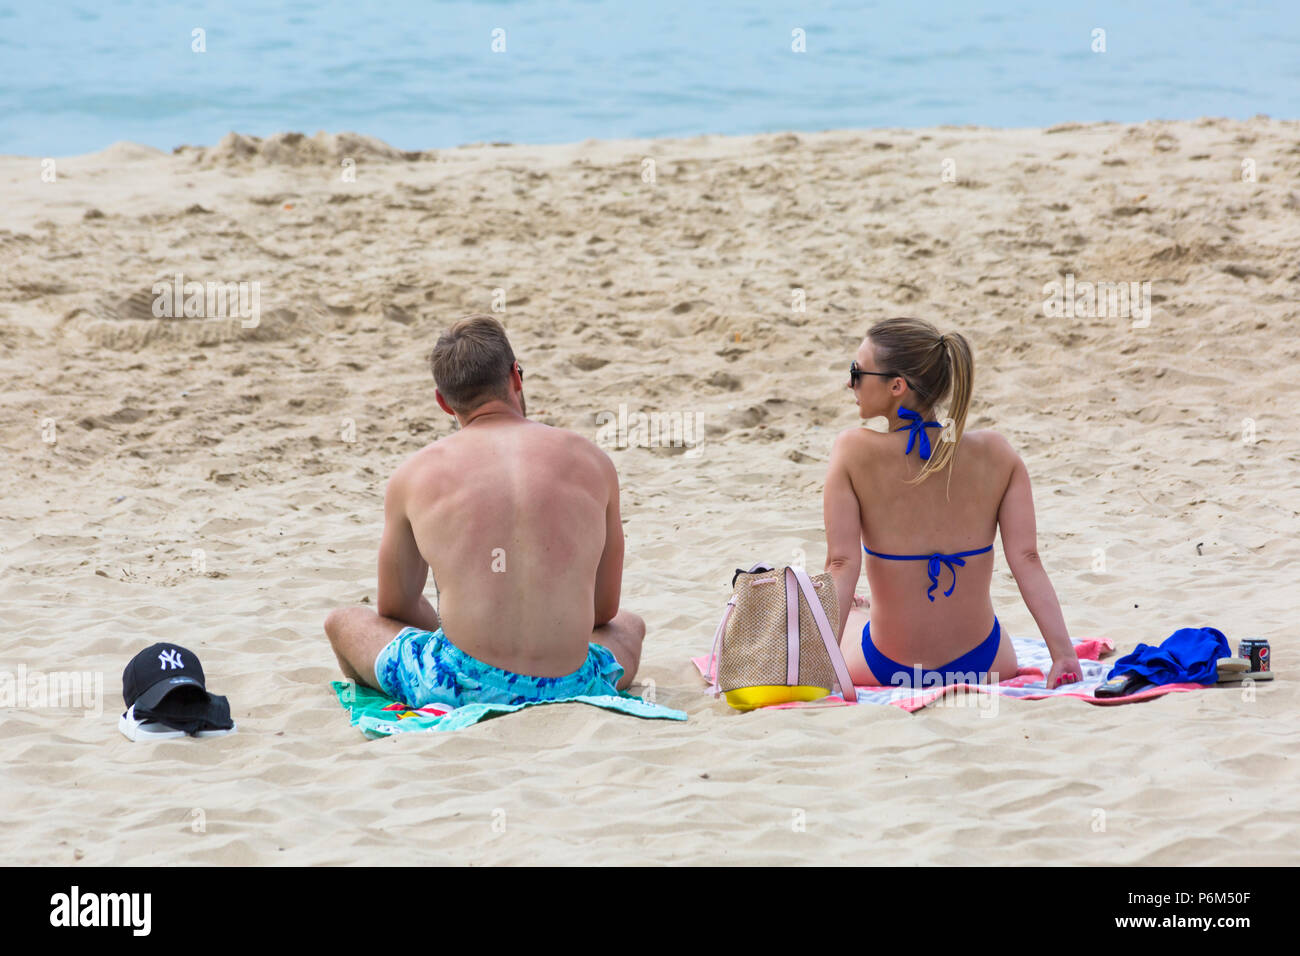 Bournemouth, Dorset, UK. 1st July 2018. UK weather: hazy sunshine, but still warm as thousands of sunseekers head to the beaches at Bournemouth to enjoy a day at the seaside. Couple sunbathing on the beach, back rear view. Credit: Carolyn Jenkins/Alamy Live News Stock Photo